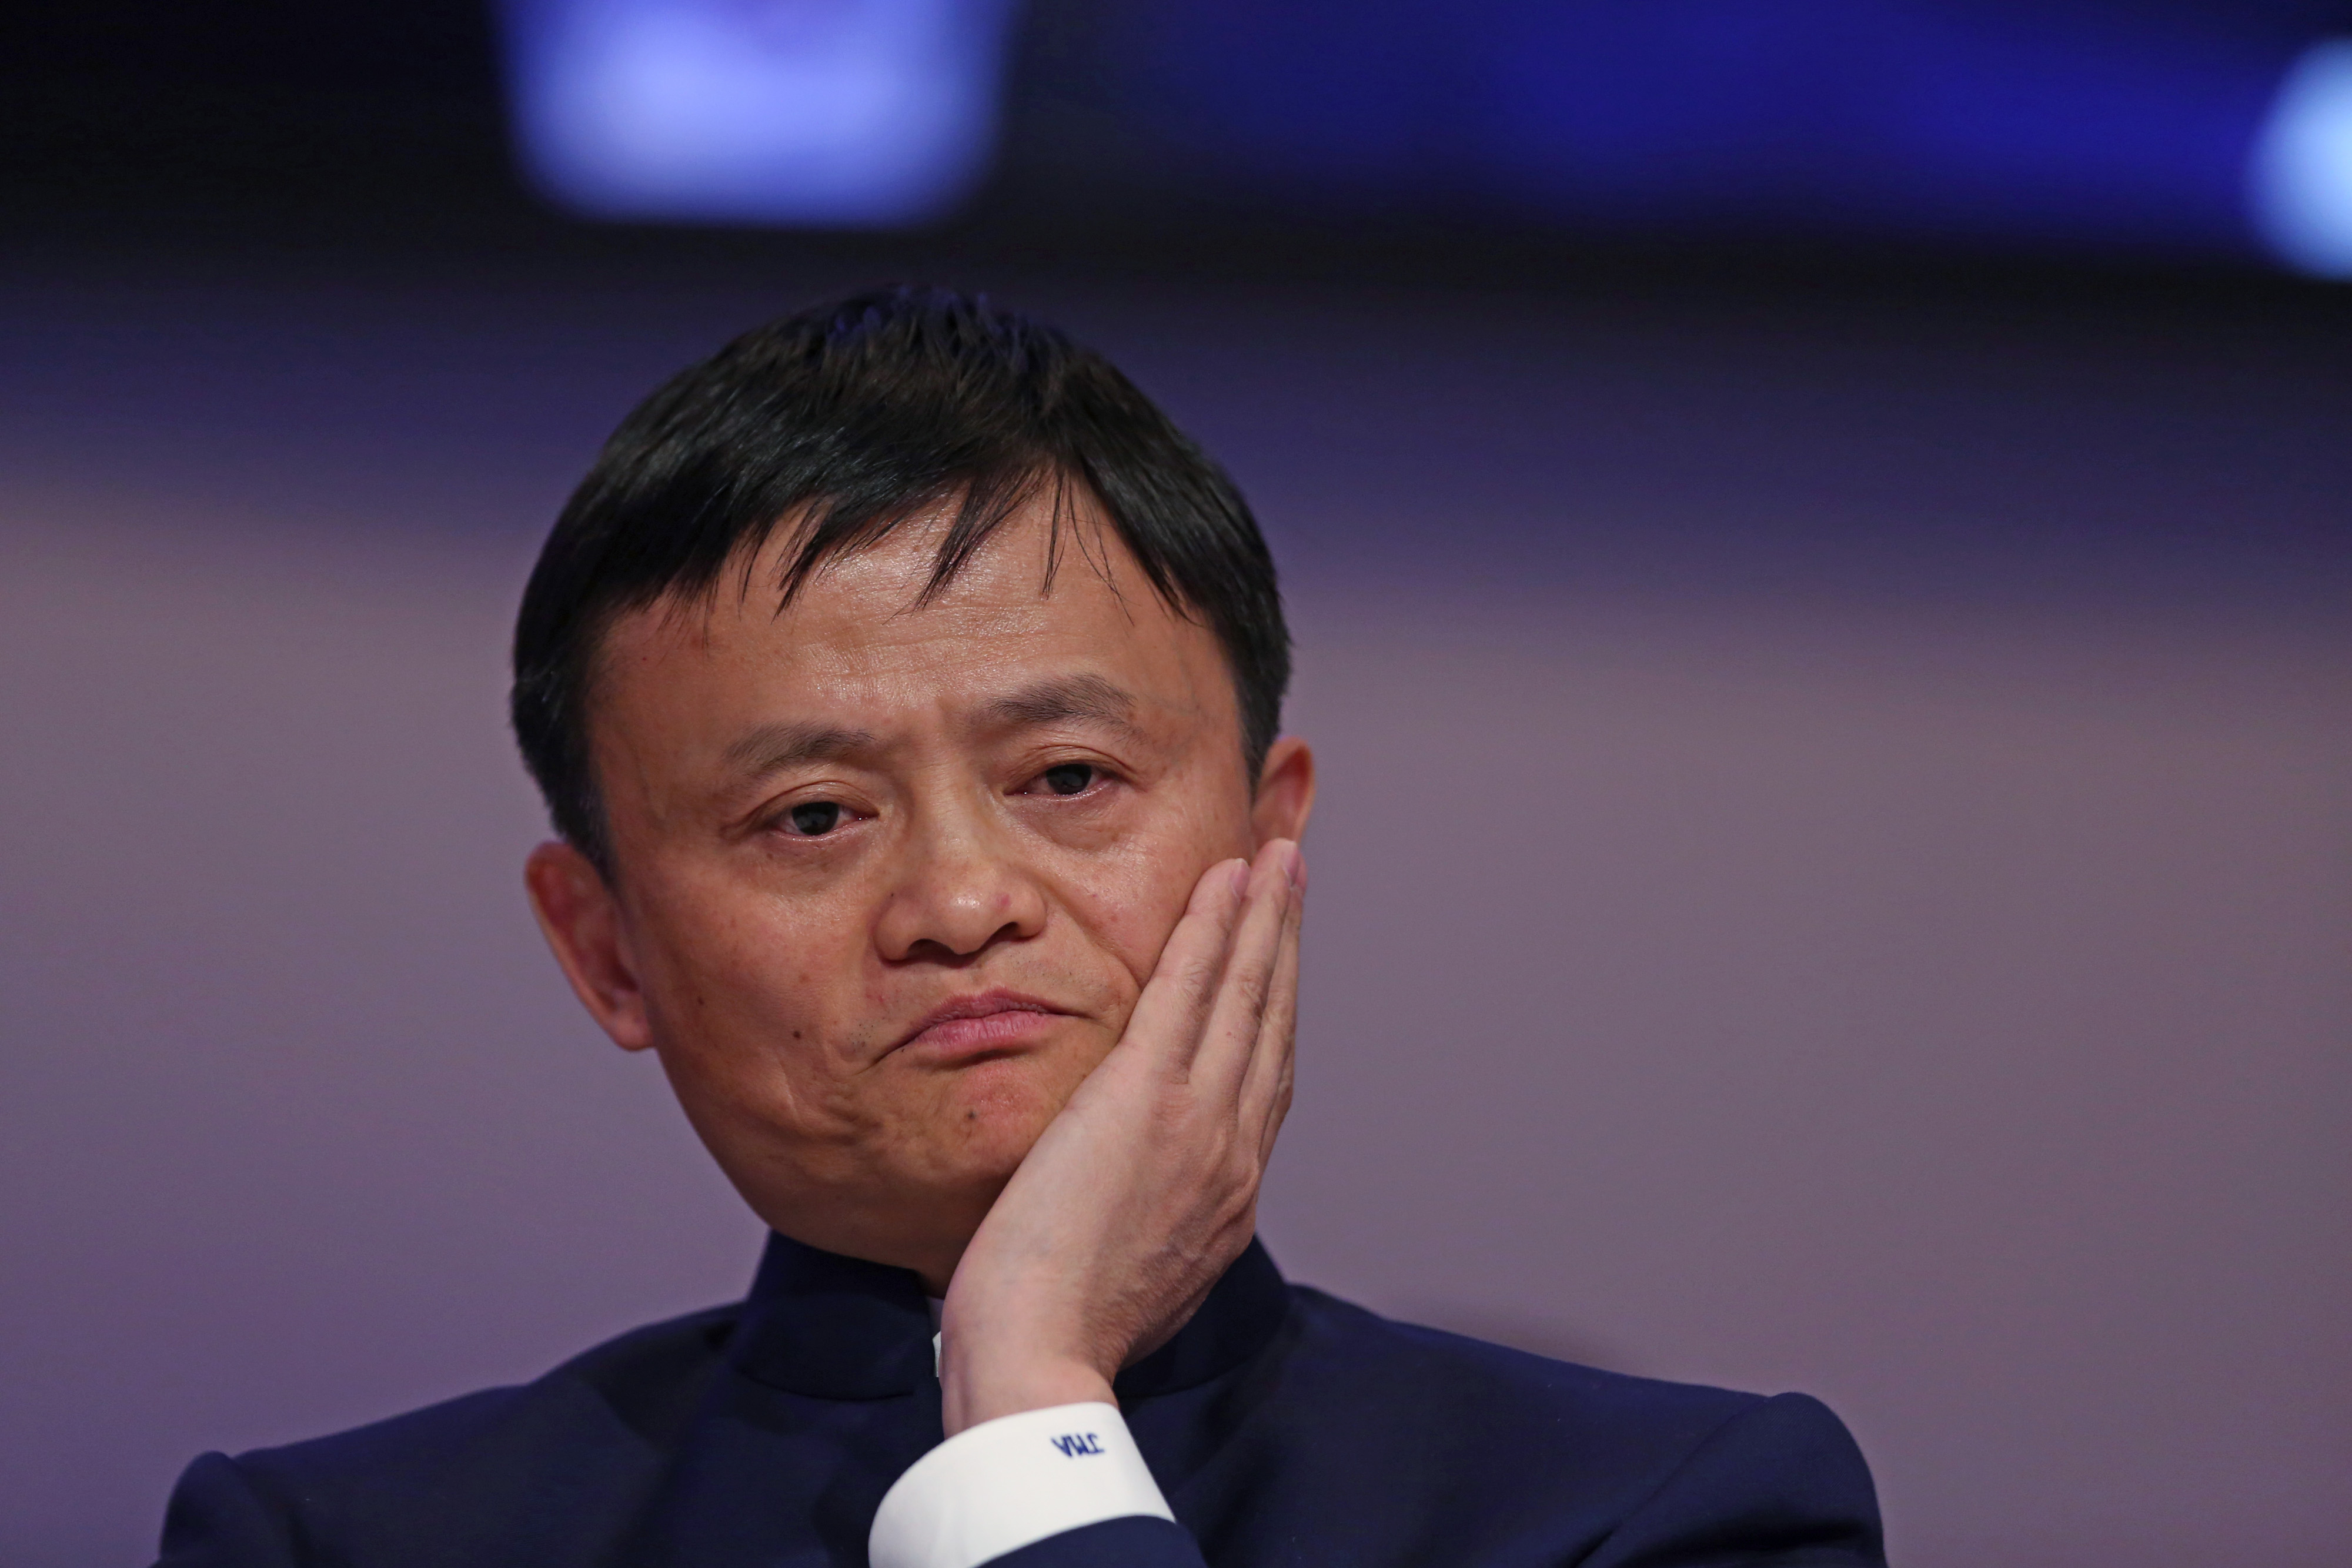 Jack Ma, billionaire and chairman of Alibaba Group Holding Ltd., during the World Economic Forum in Davos, Switzerland on Jan. 23, 2015.